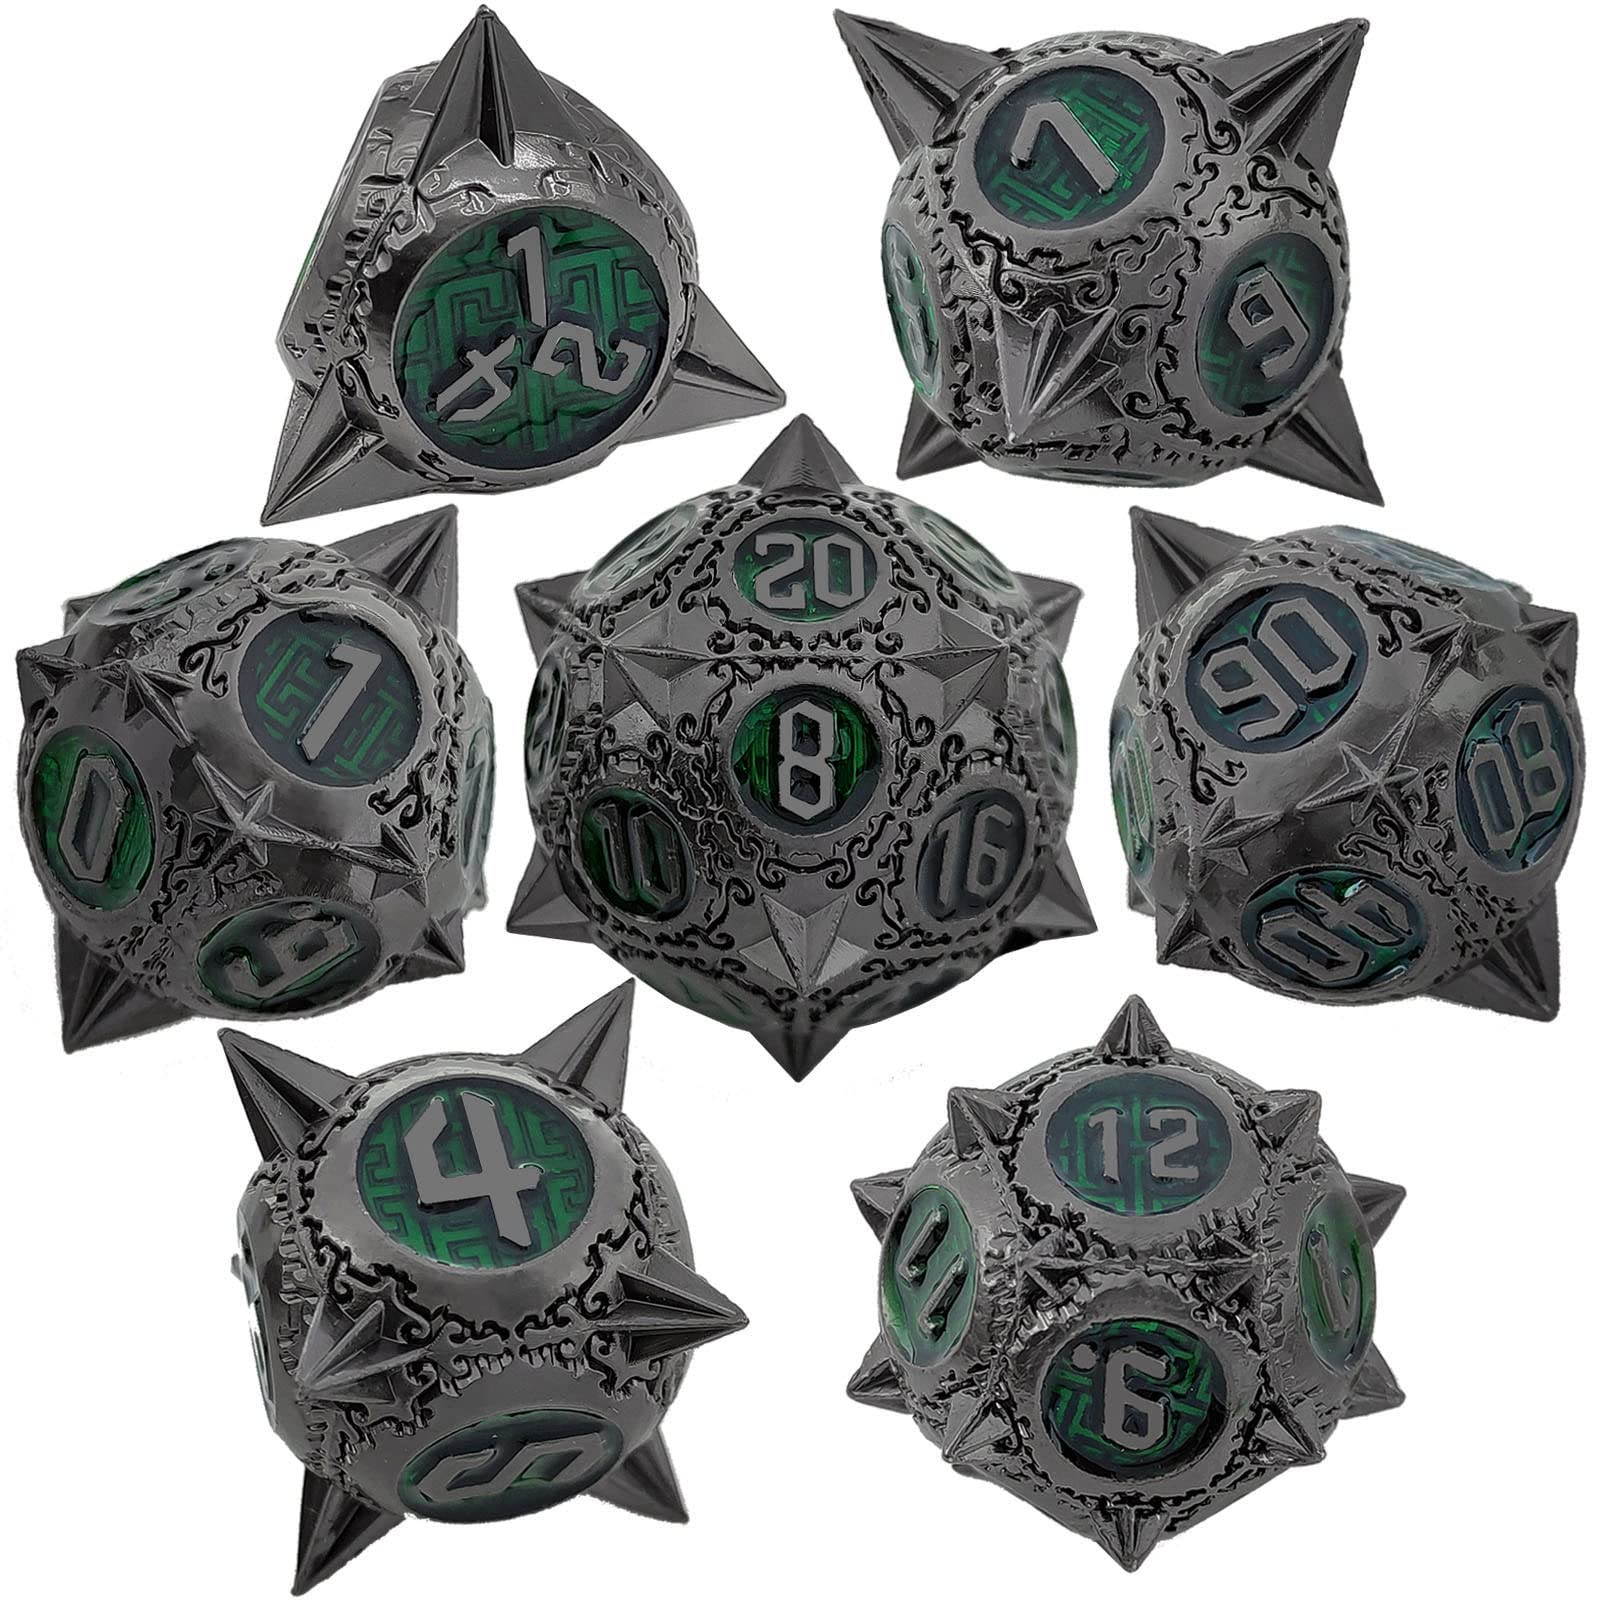 Metal DND Dice Set Dungeons and Dragons Dice Set with Dice Bag D and D Dice Set D&D Polyhedral Dice for Pathfinder MTG Warhammer RPG Role Playing Dice Game 6 Sided D20 D12 D10 D8 D6 D4